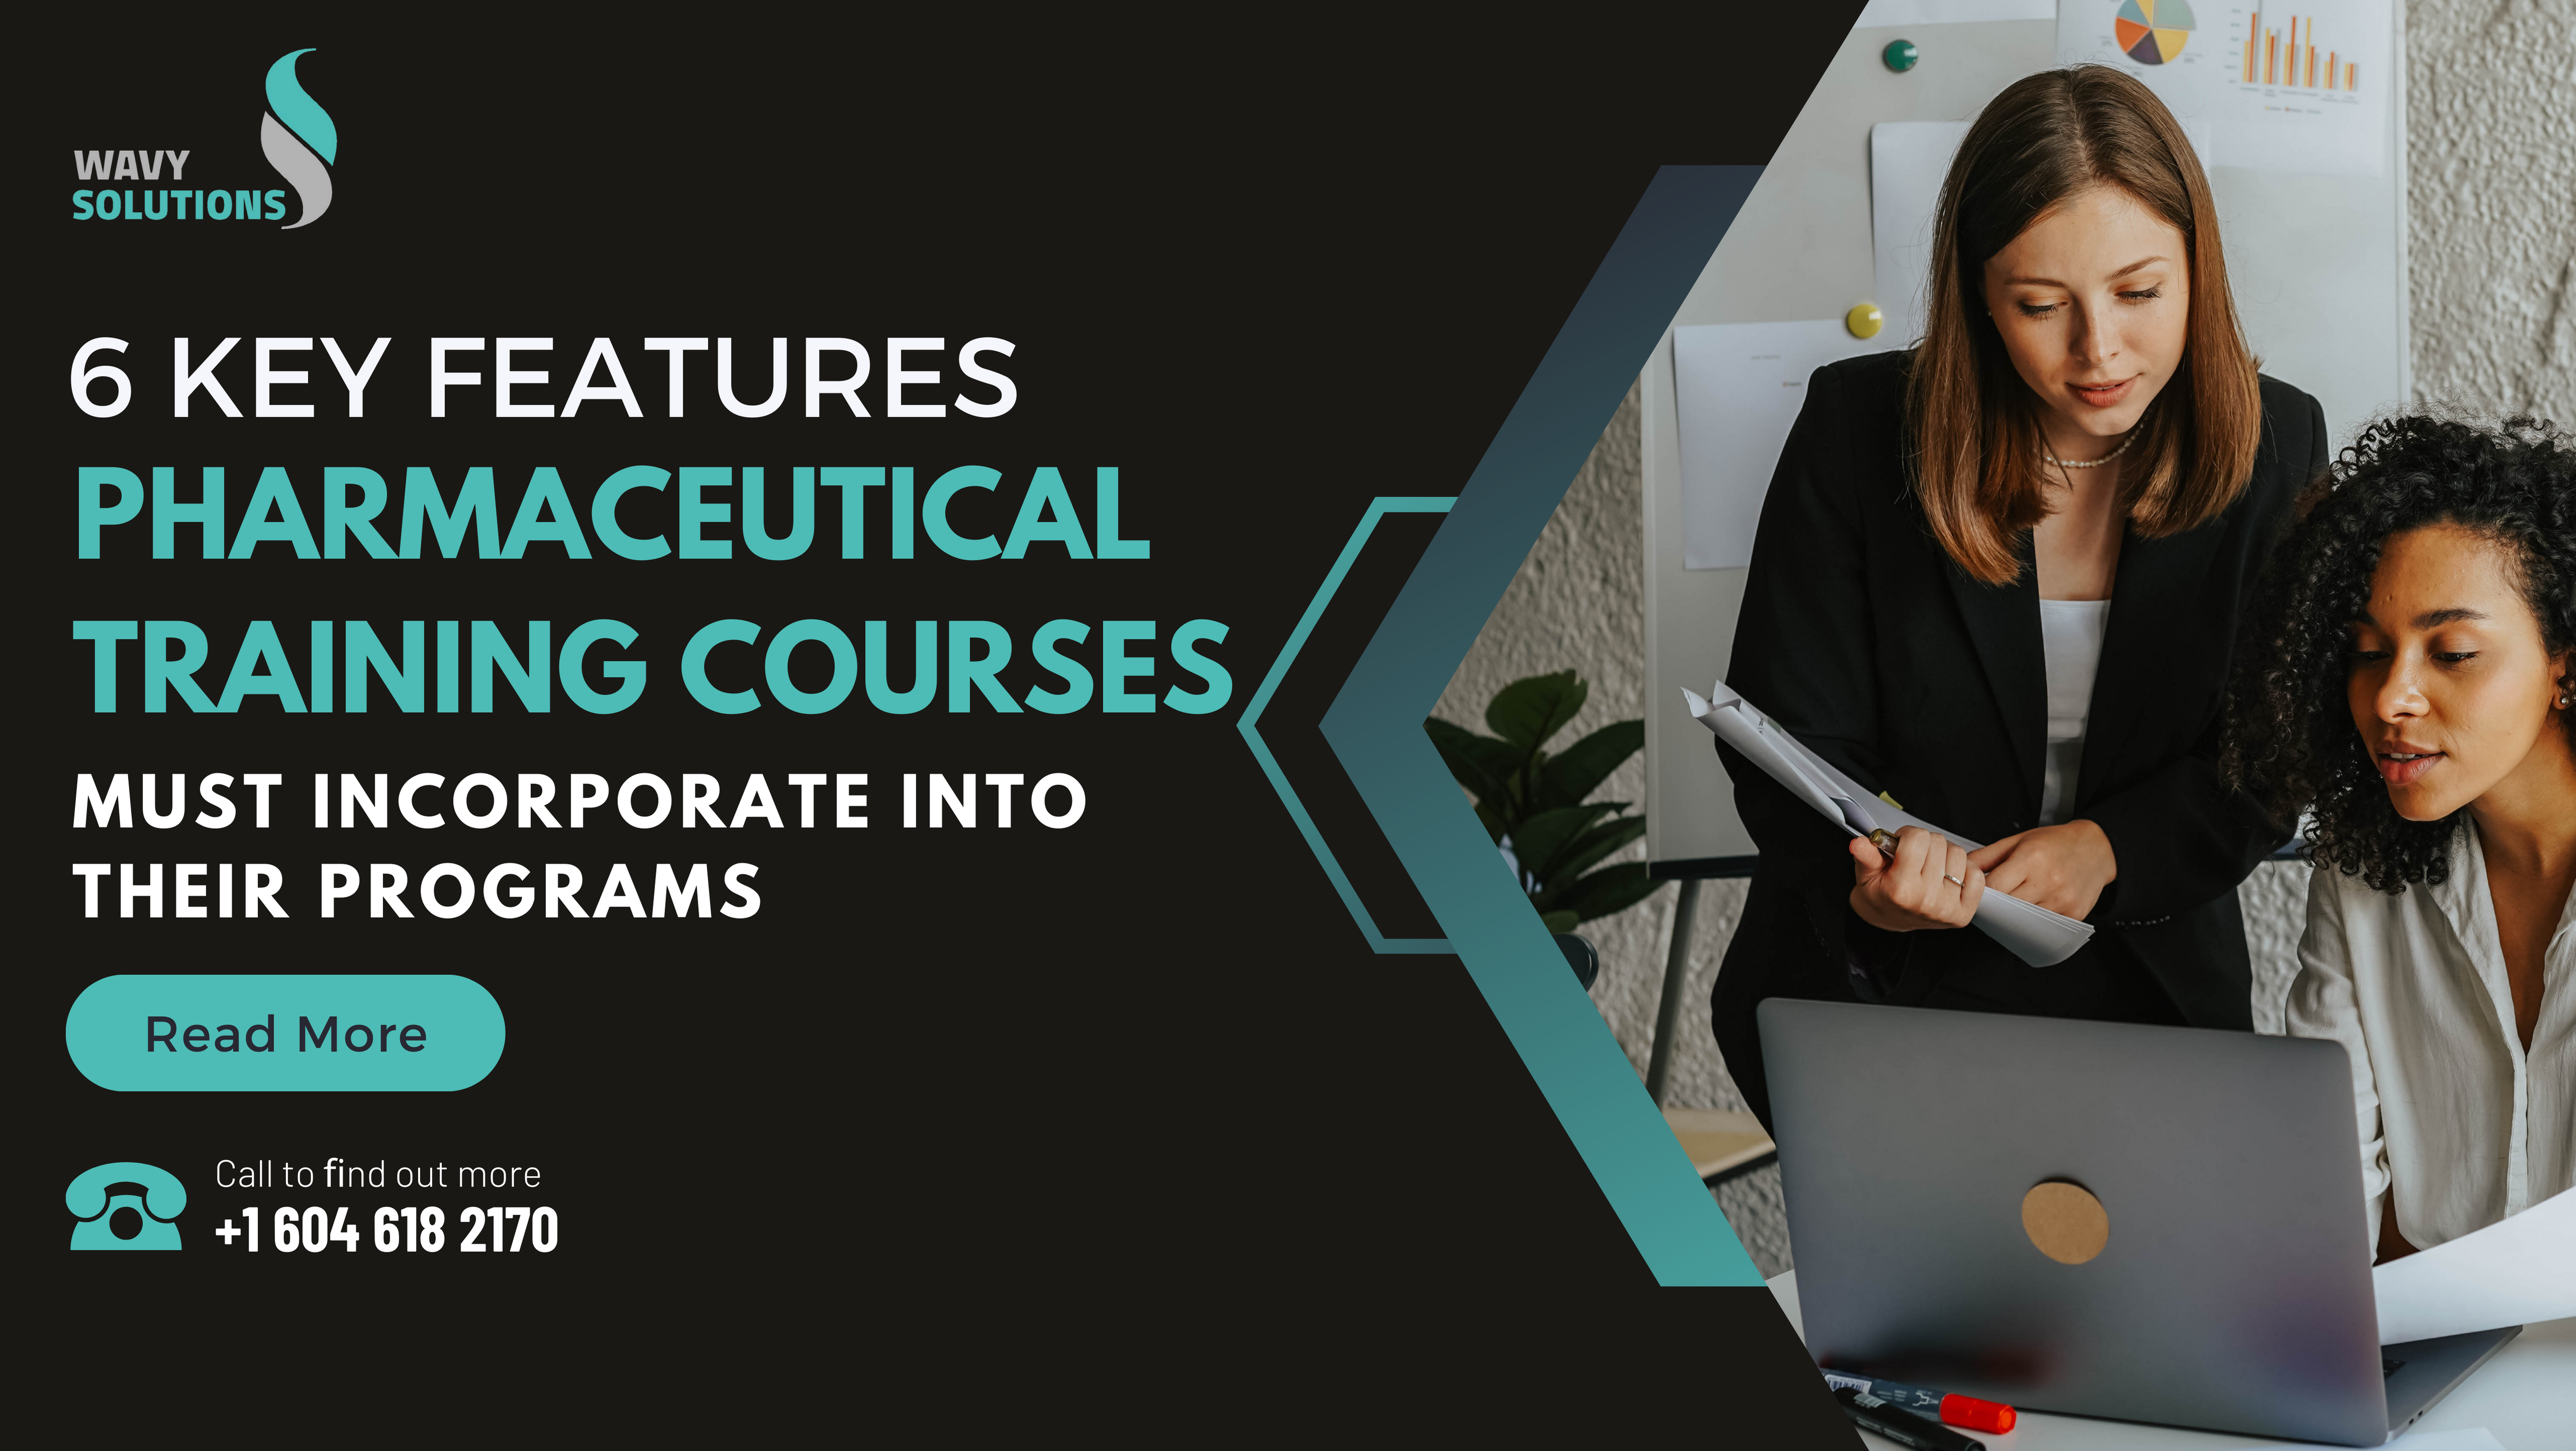 6 Key Features Pharmaceutical Training Courses Must Incorporate Into Their Programs